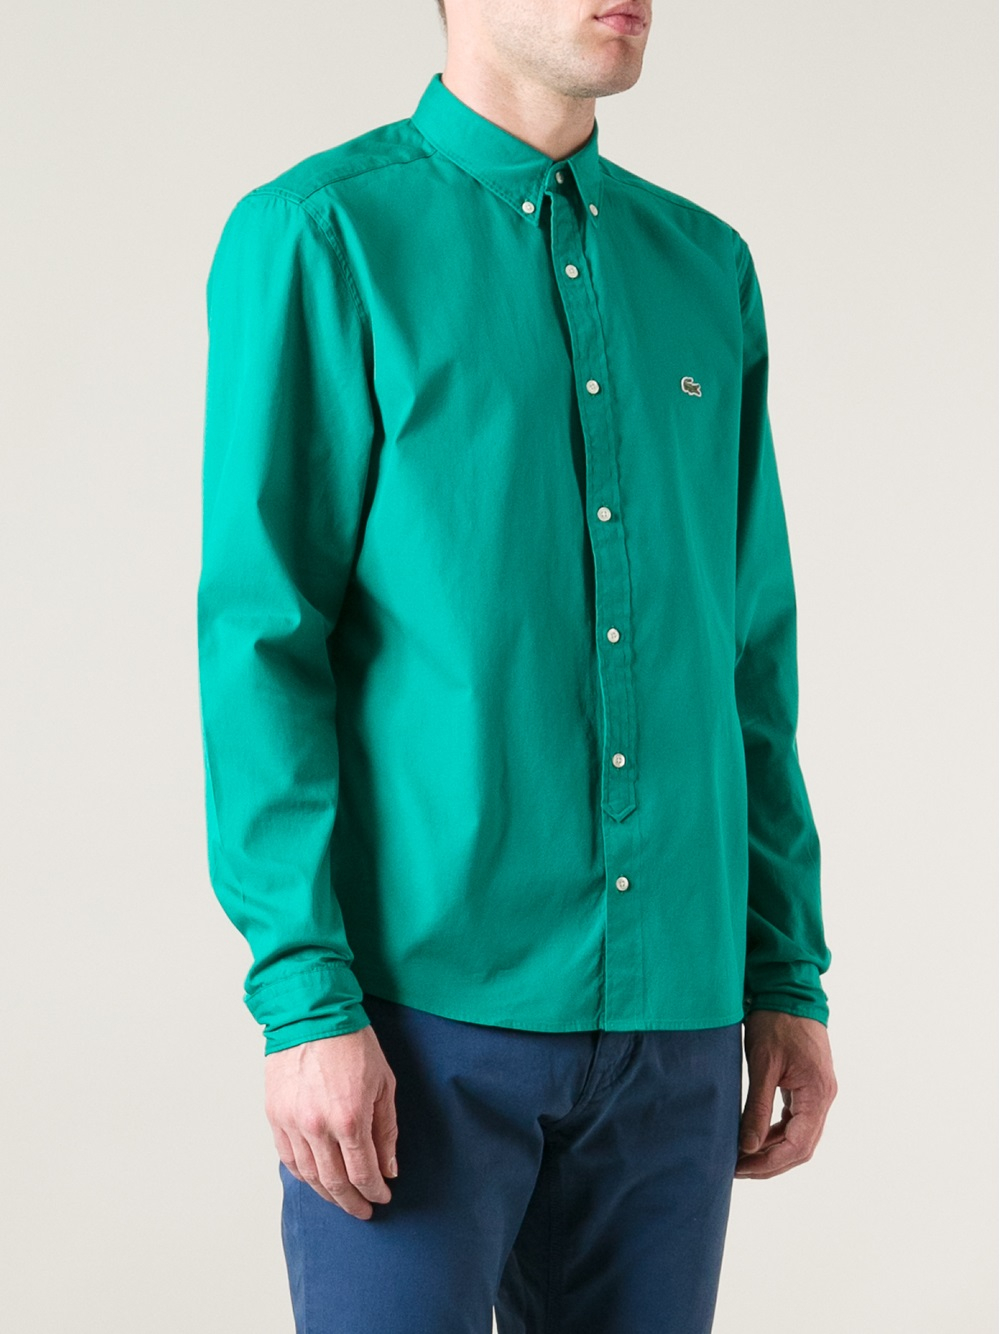 Lacoste L!ive Long Sleeve Shirt in Green for Men - Lyst